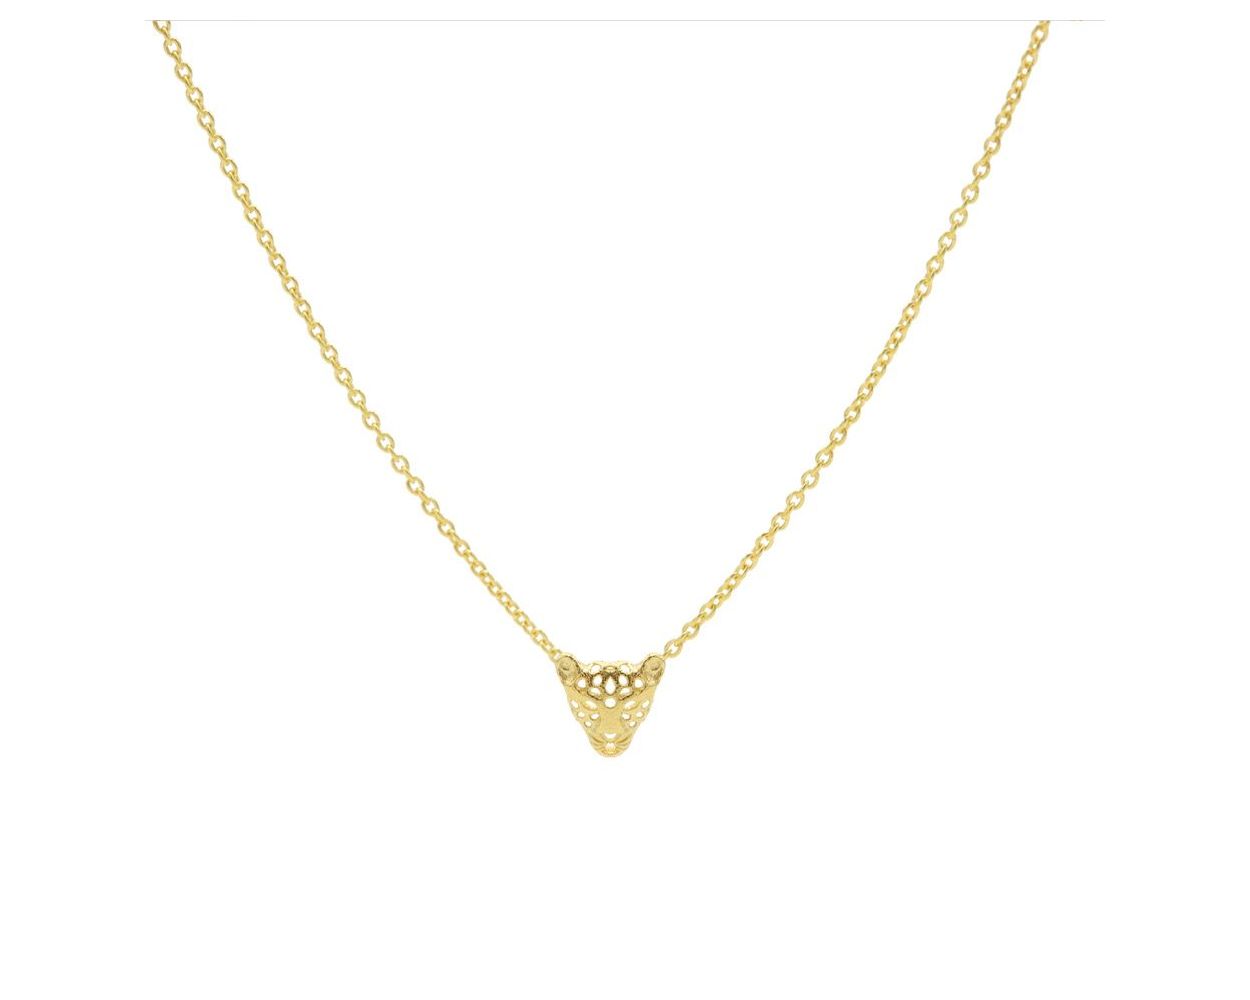 Karma Necklace Panther - Gold plated